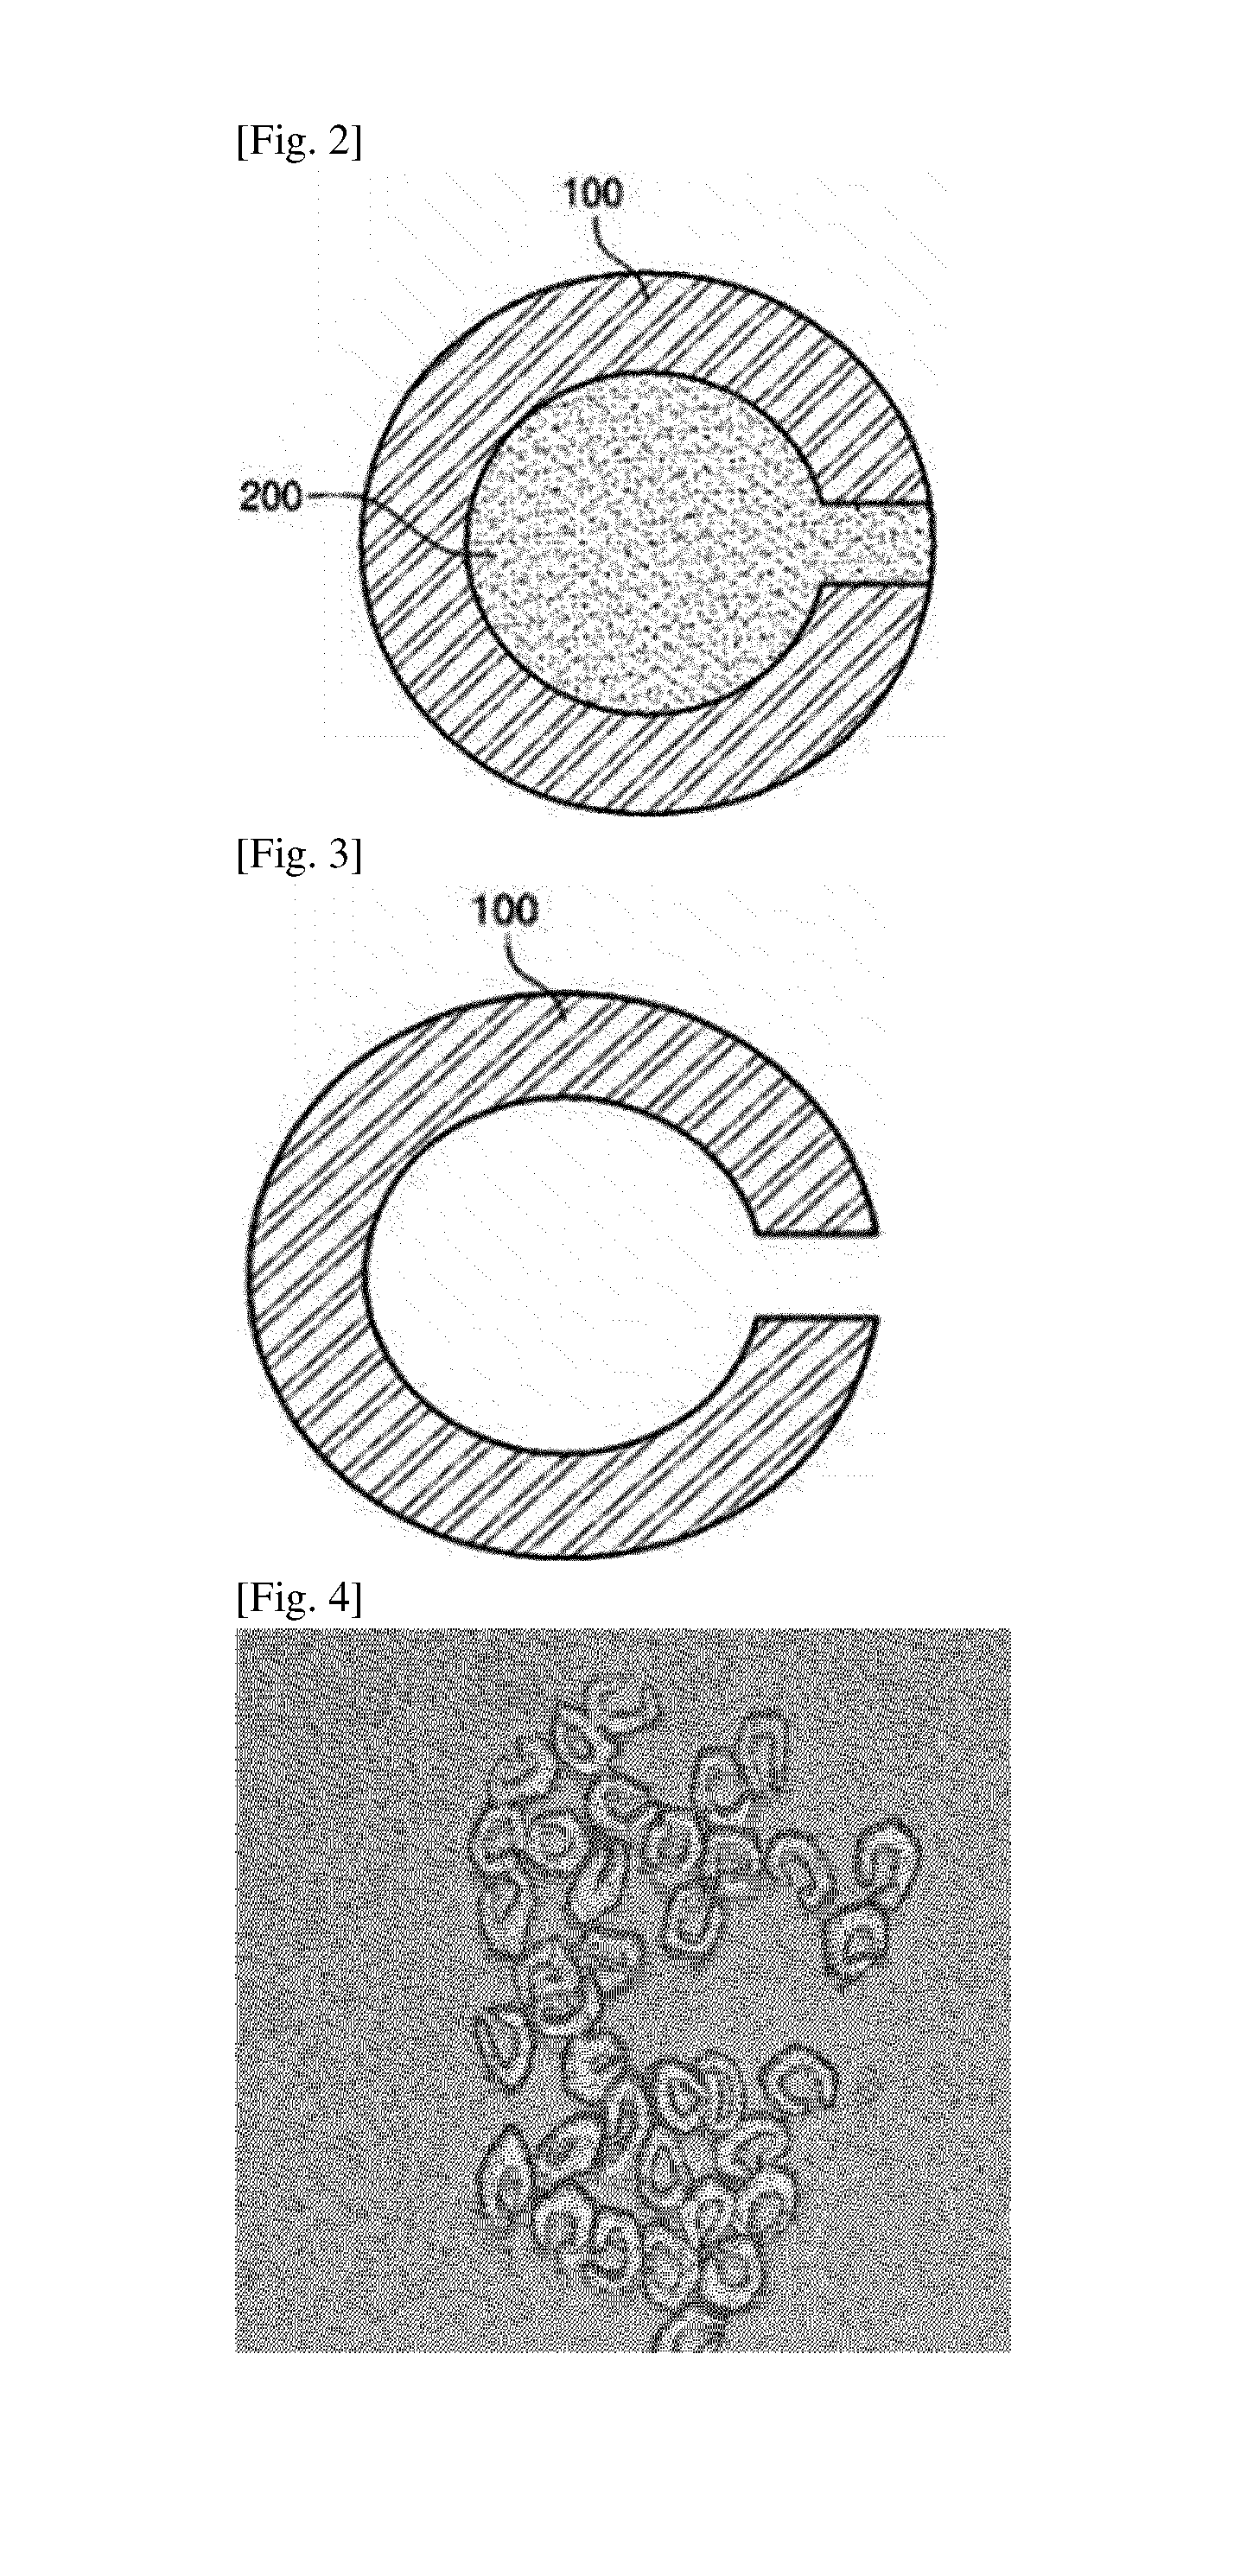 C-Shaped Composite Fiber, C-Shaped Hollow Fiber Thereof, Fabric Including Same, And Method For Manufacturing Same